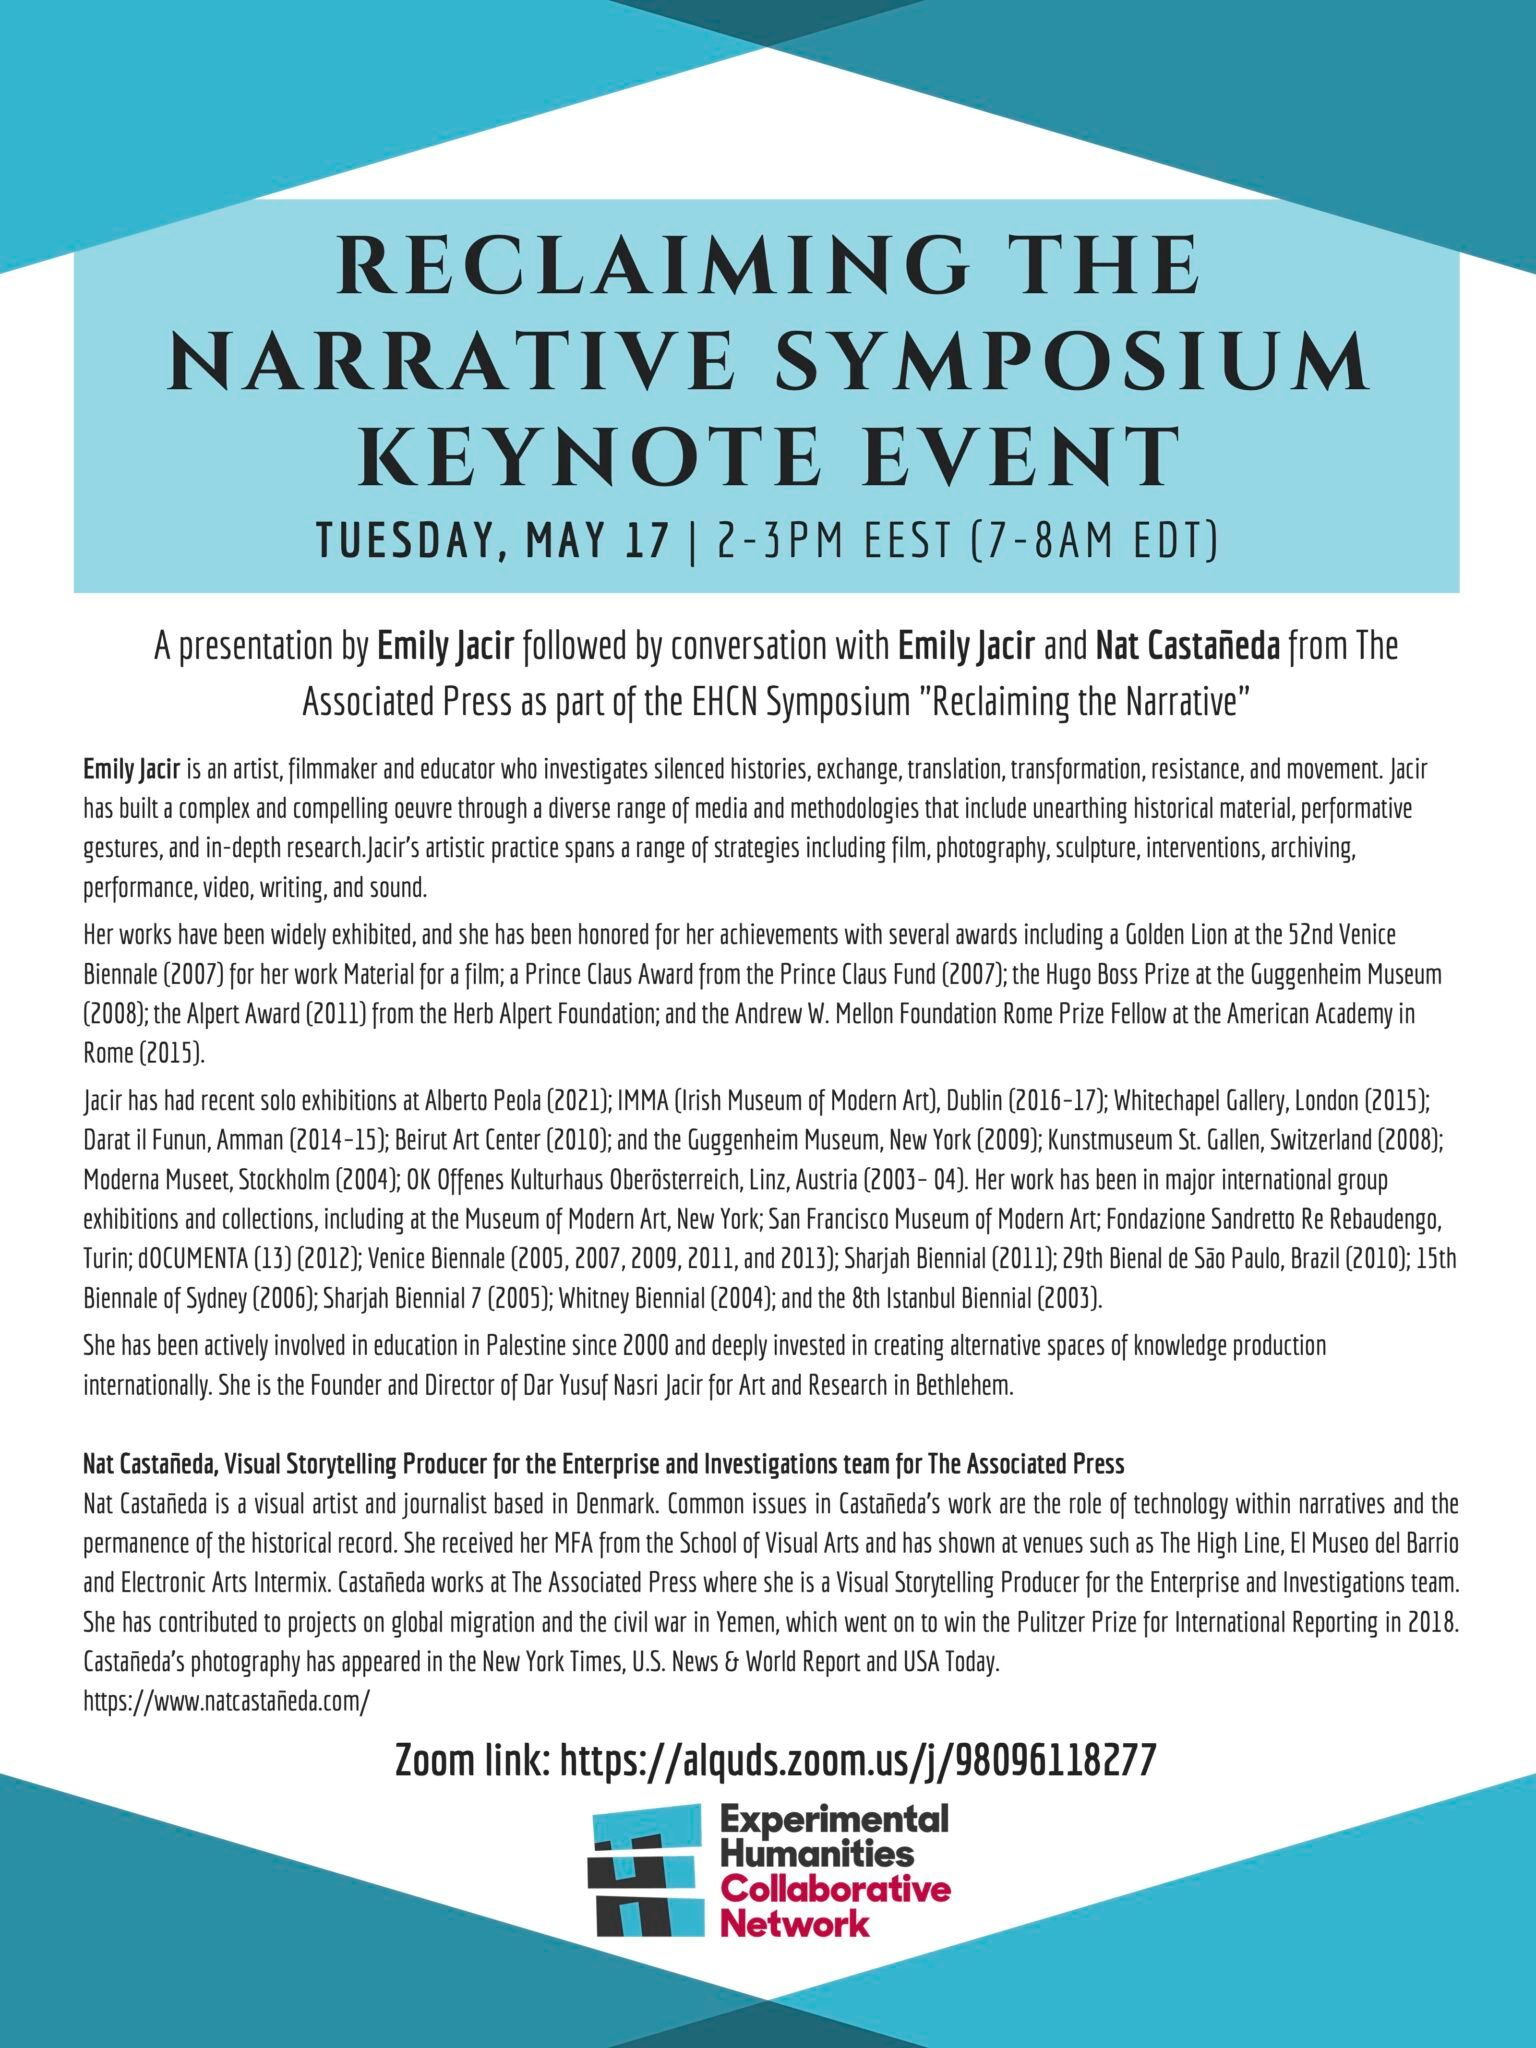 Poster for the Reclaiming the Narrative Symposium Keynote Event